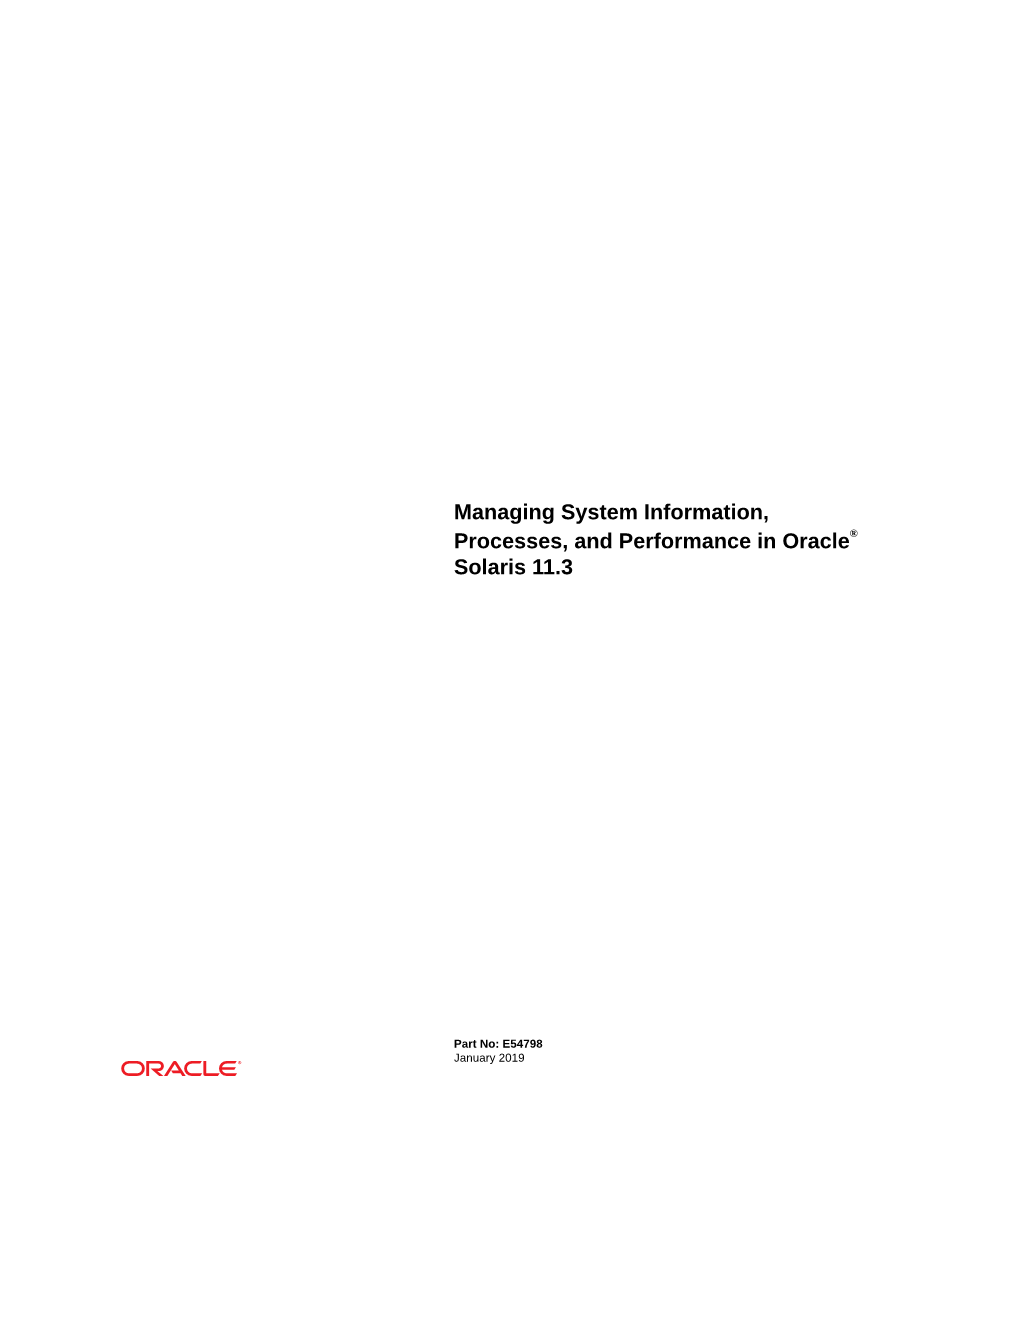 Managing System Information, Processes, and Performance in Oracle Solaris 11.3 Part No: E54798 Copyright © 1998, 2019, Oracle And/Or Its Affiliates